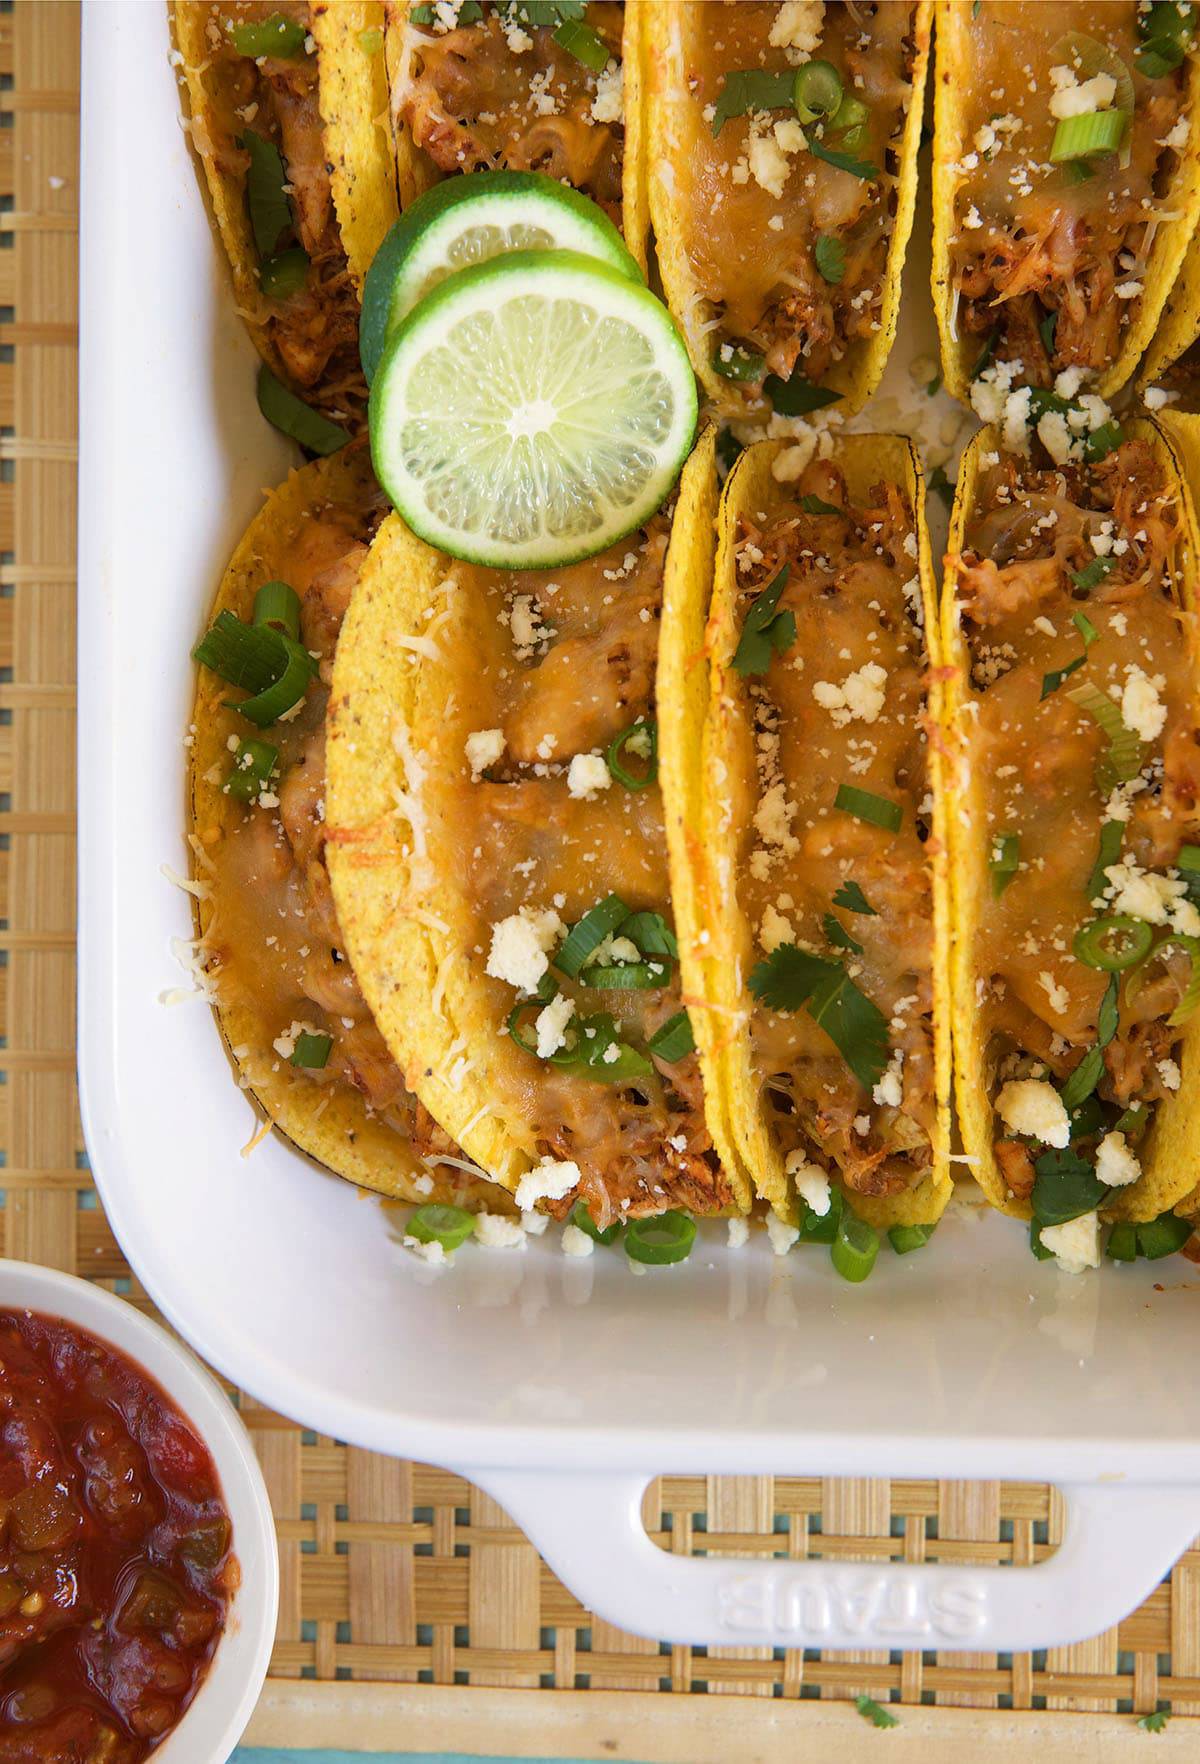 Chicken tacos are lined up and filling a white casserole dish.